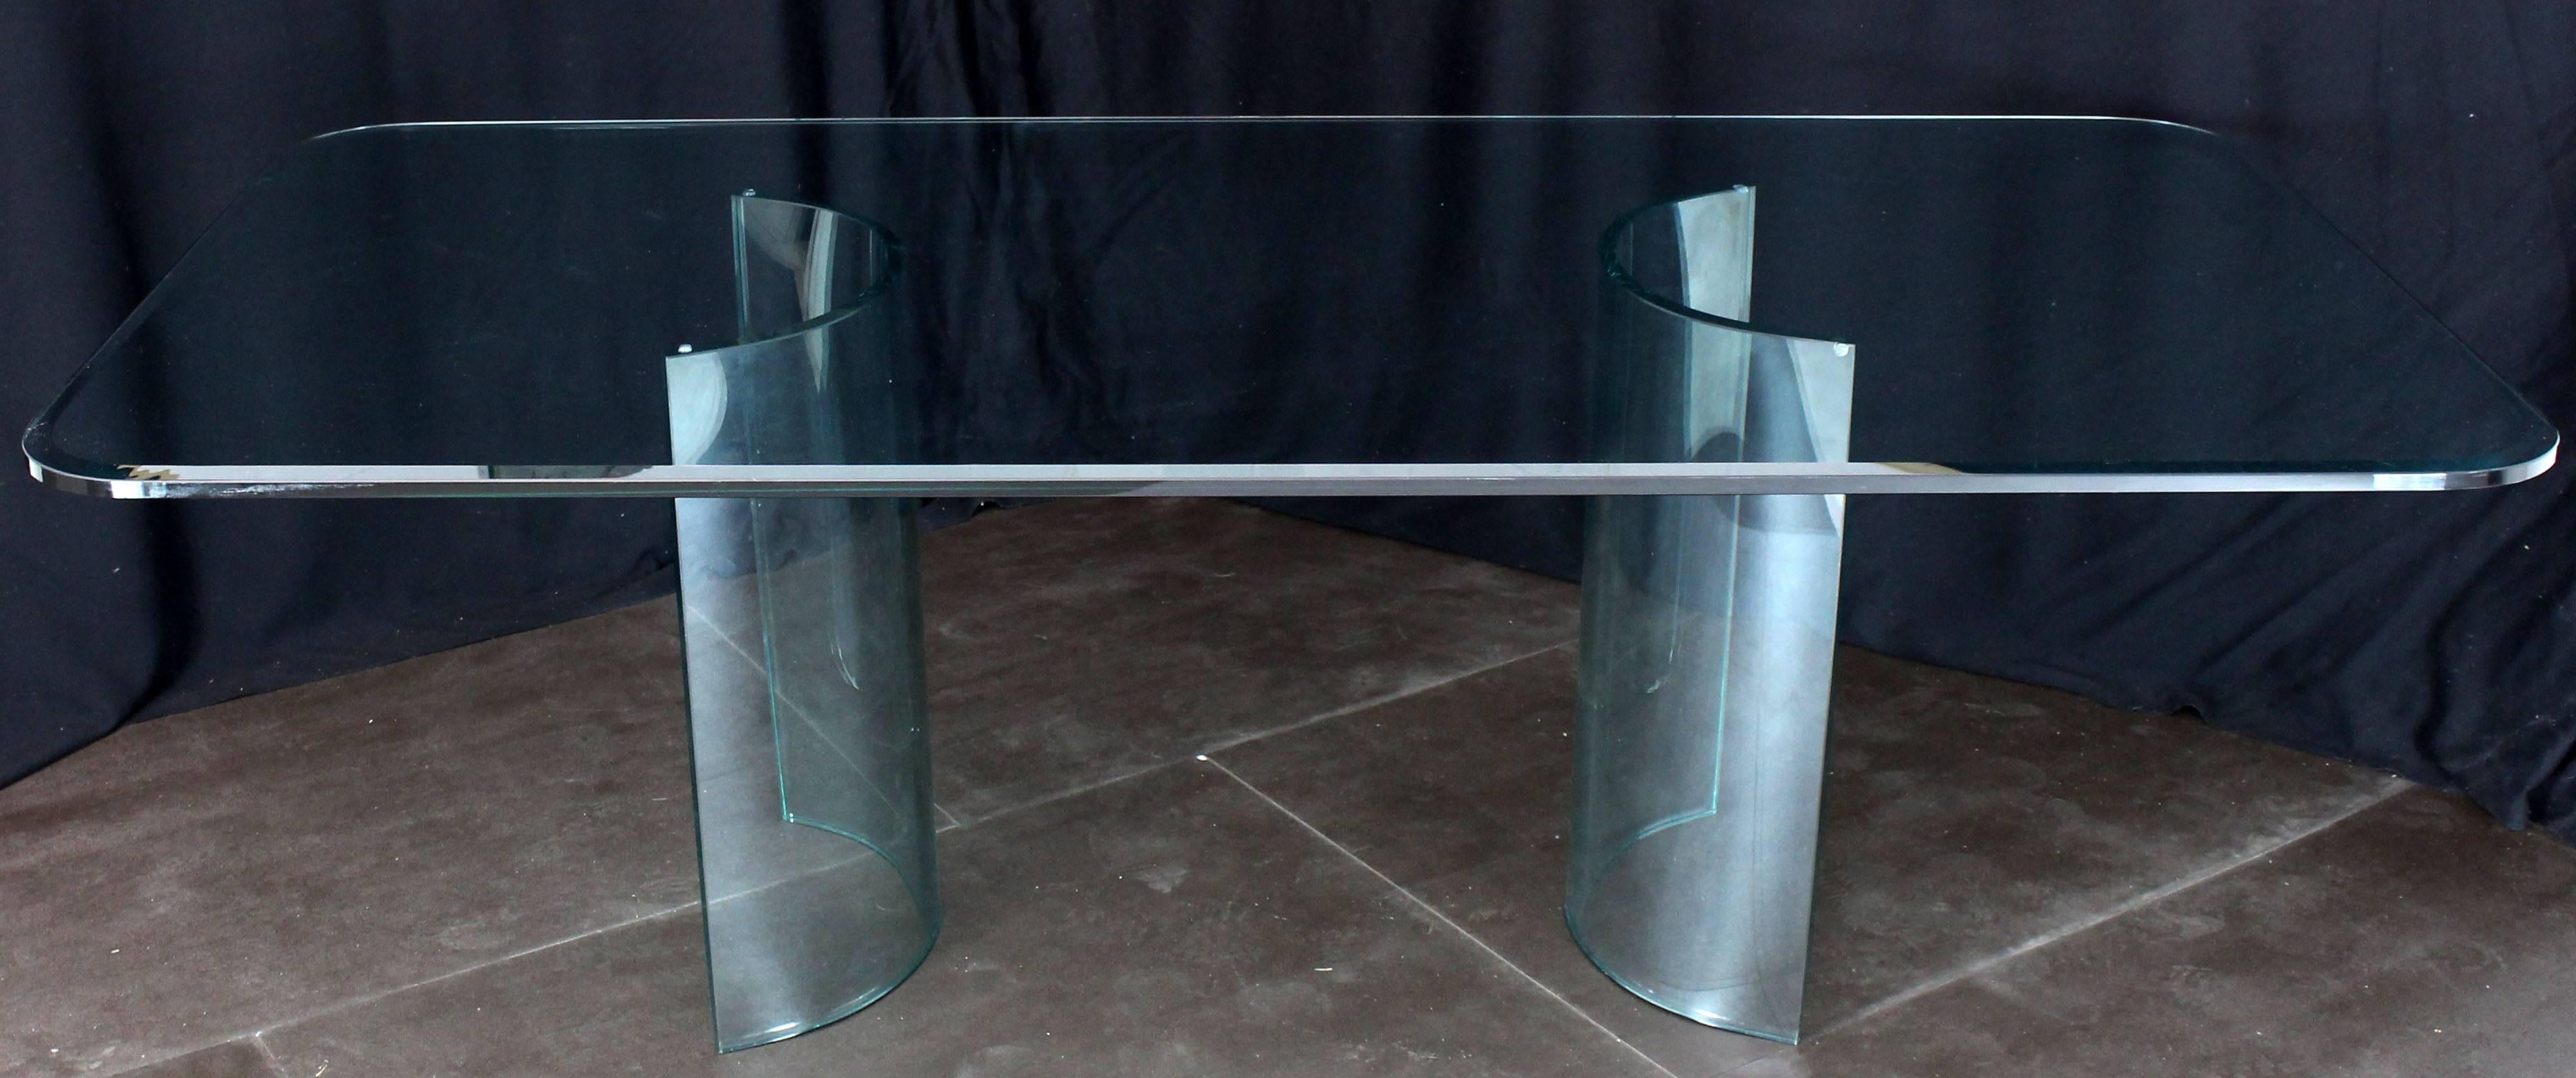 Large glass top Mid-Century Modern all transparent design conference or dining table.
 